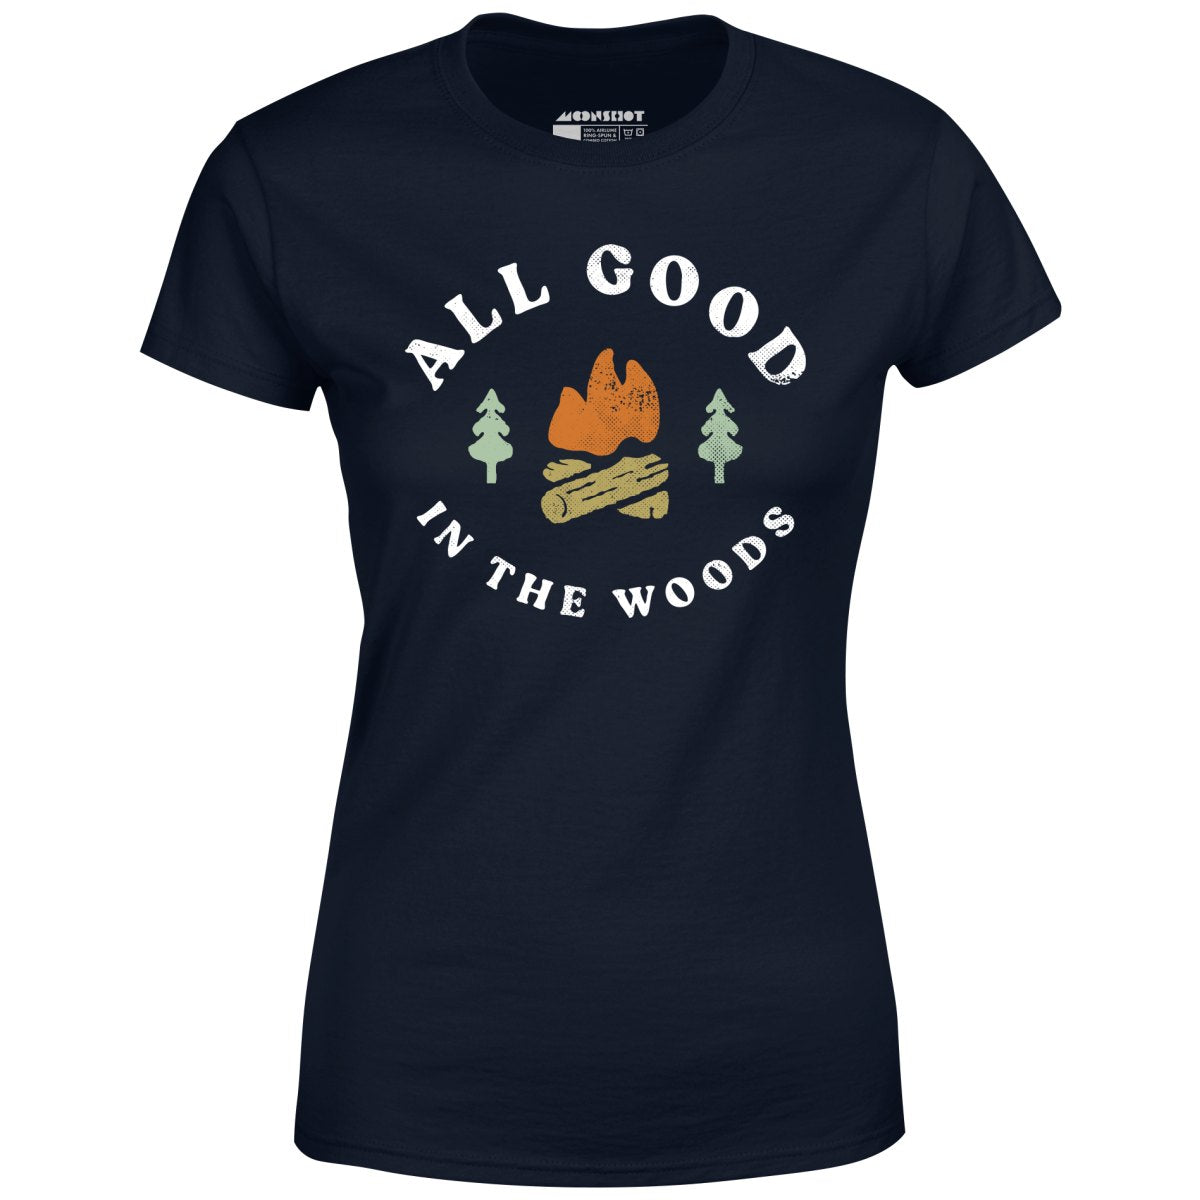 All Good in The Woods - Women's T-Shirt